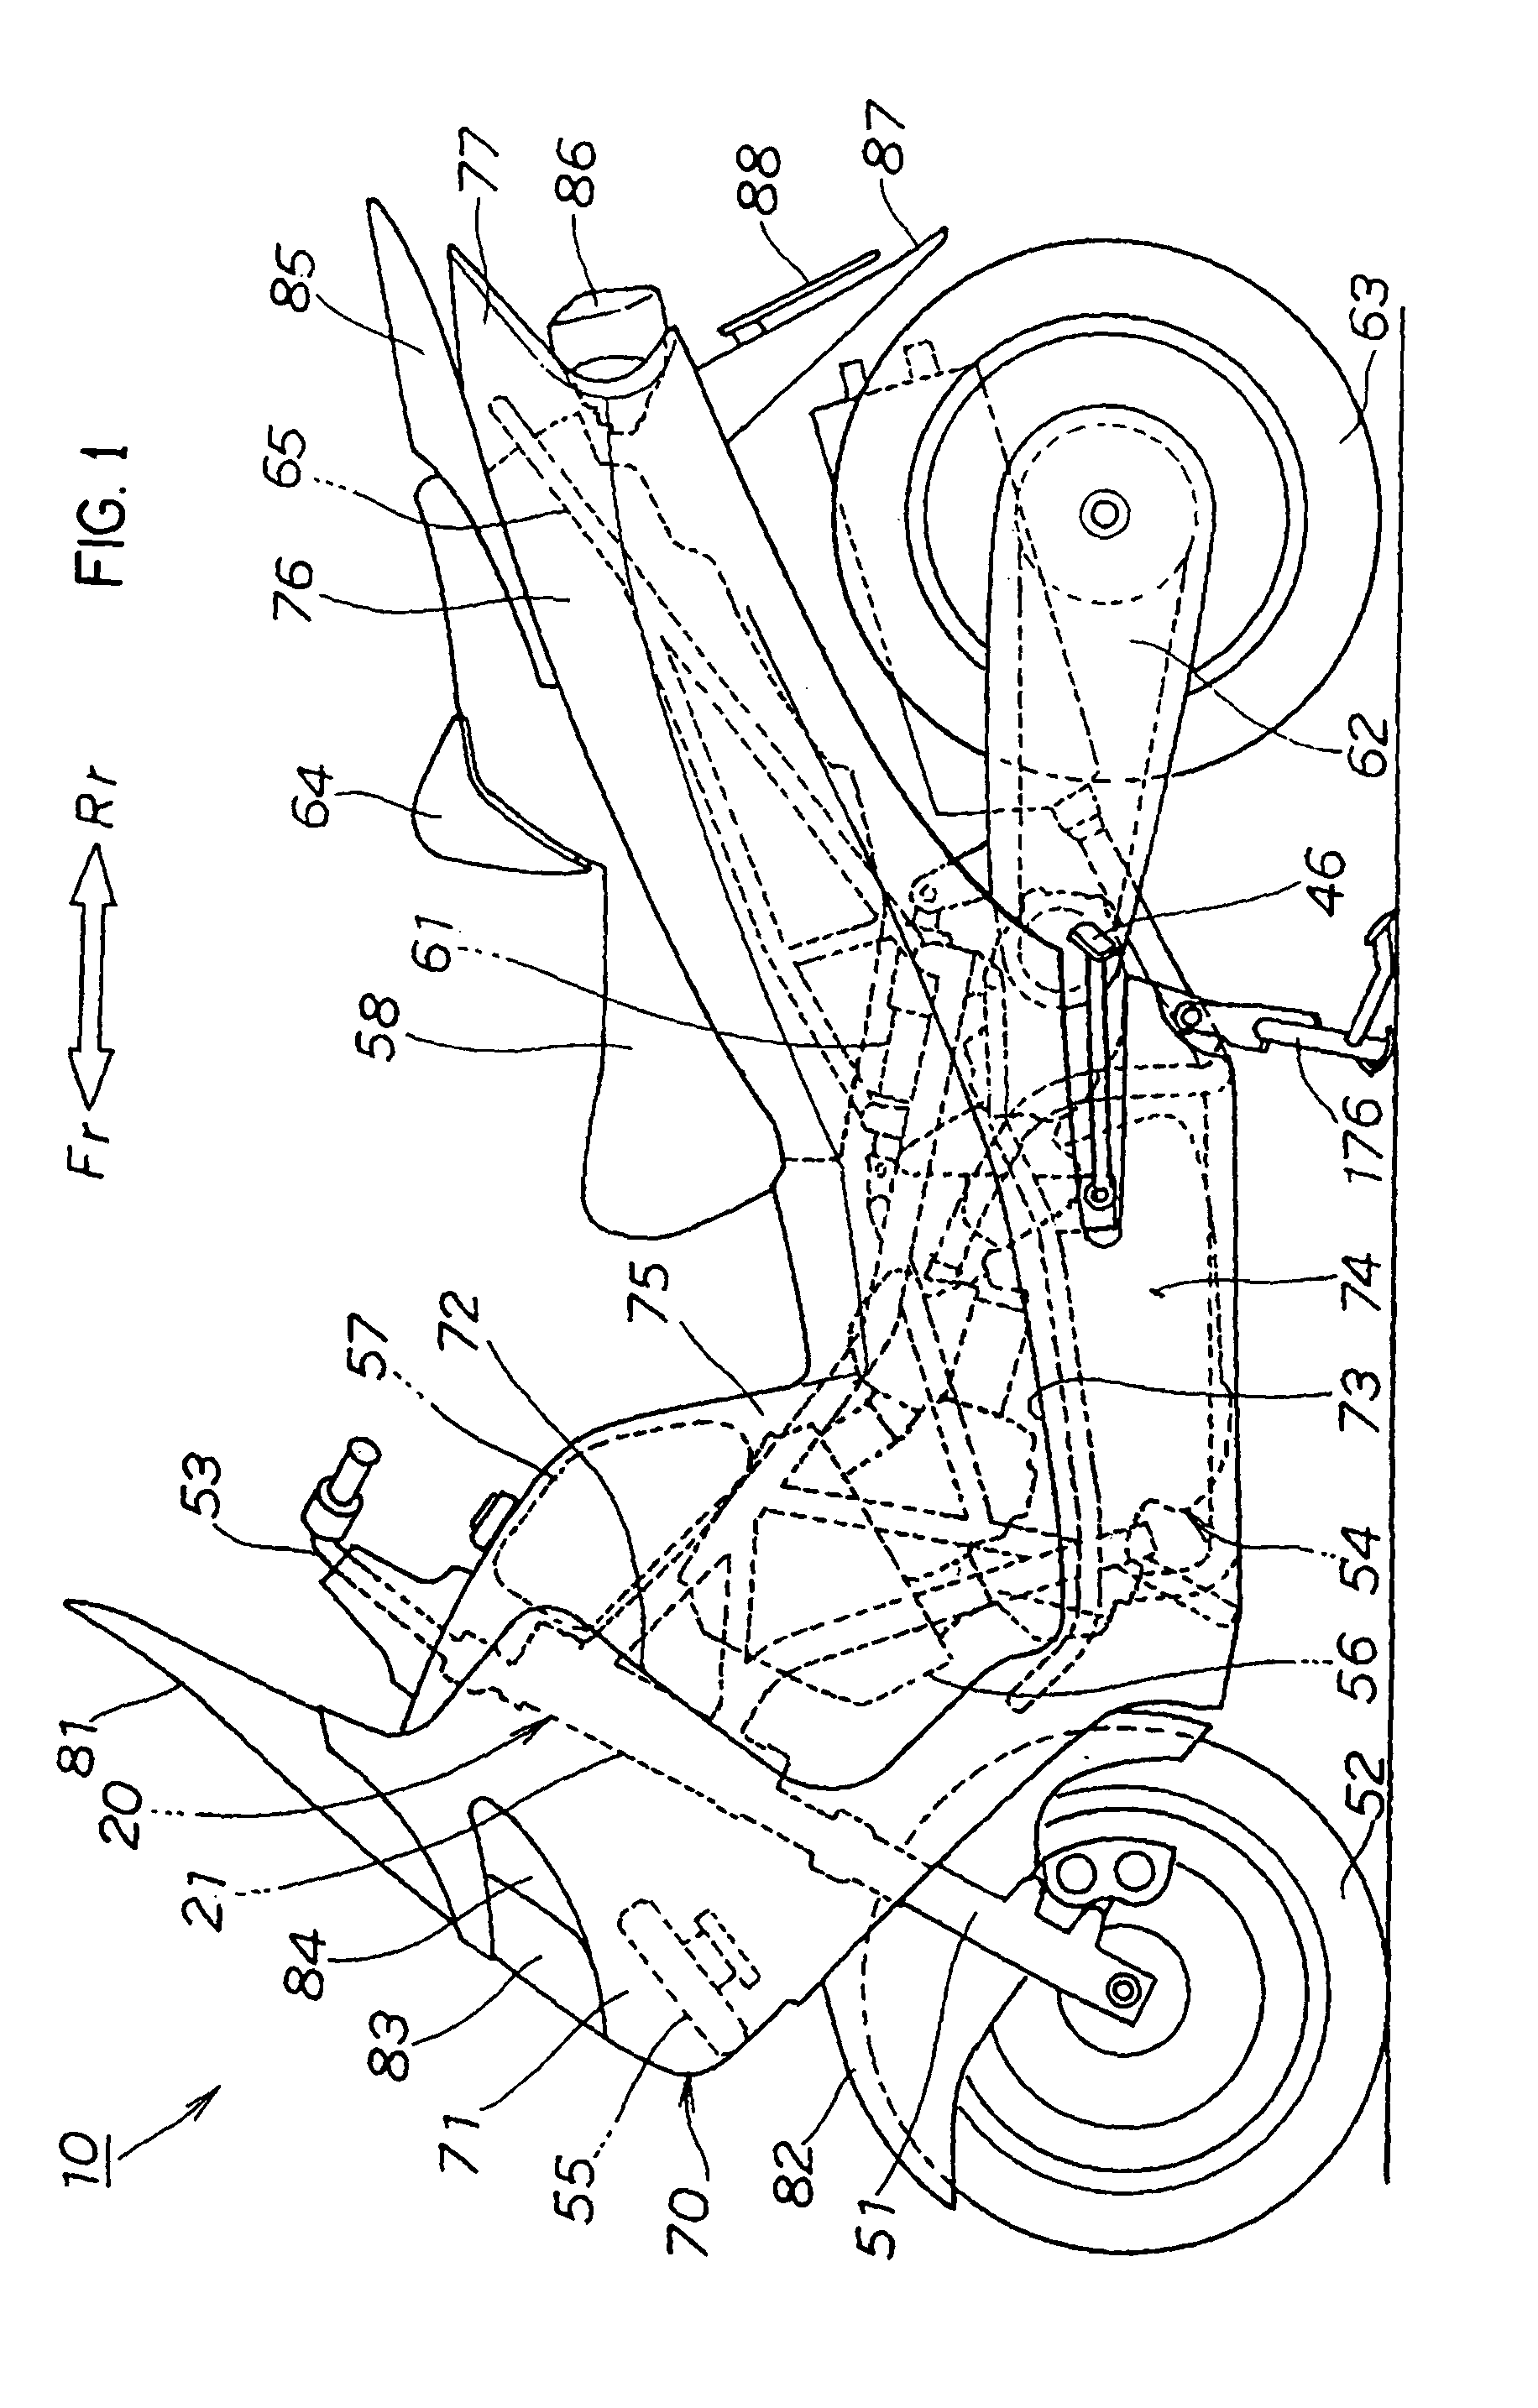 Engine mounting structure of low floor type vehicle